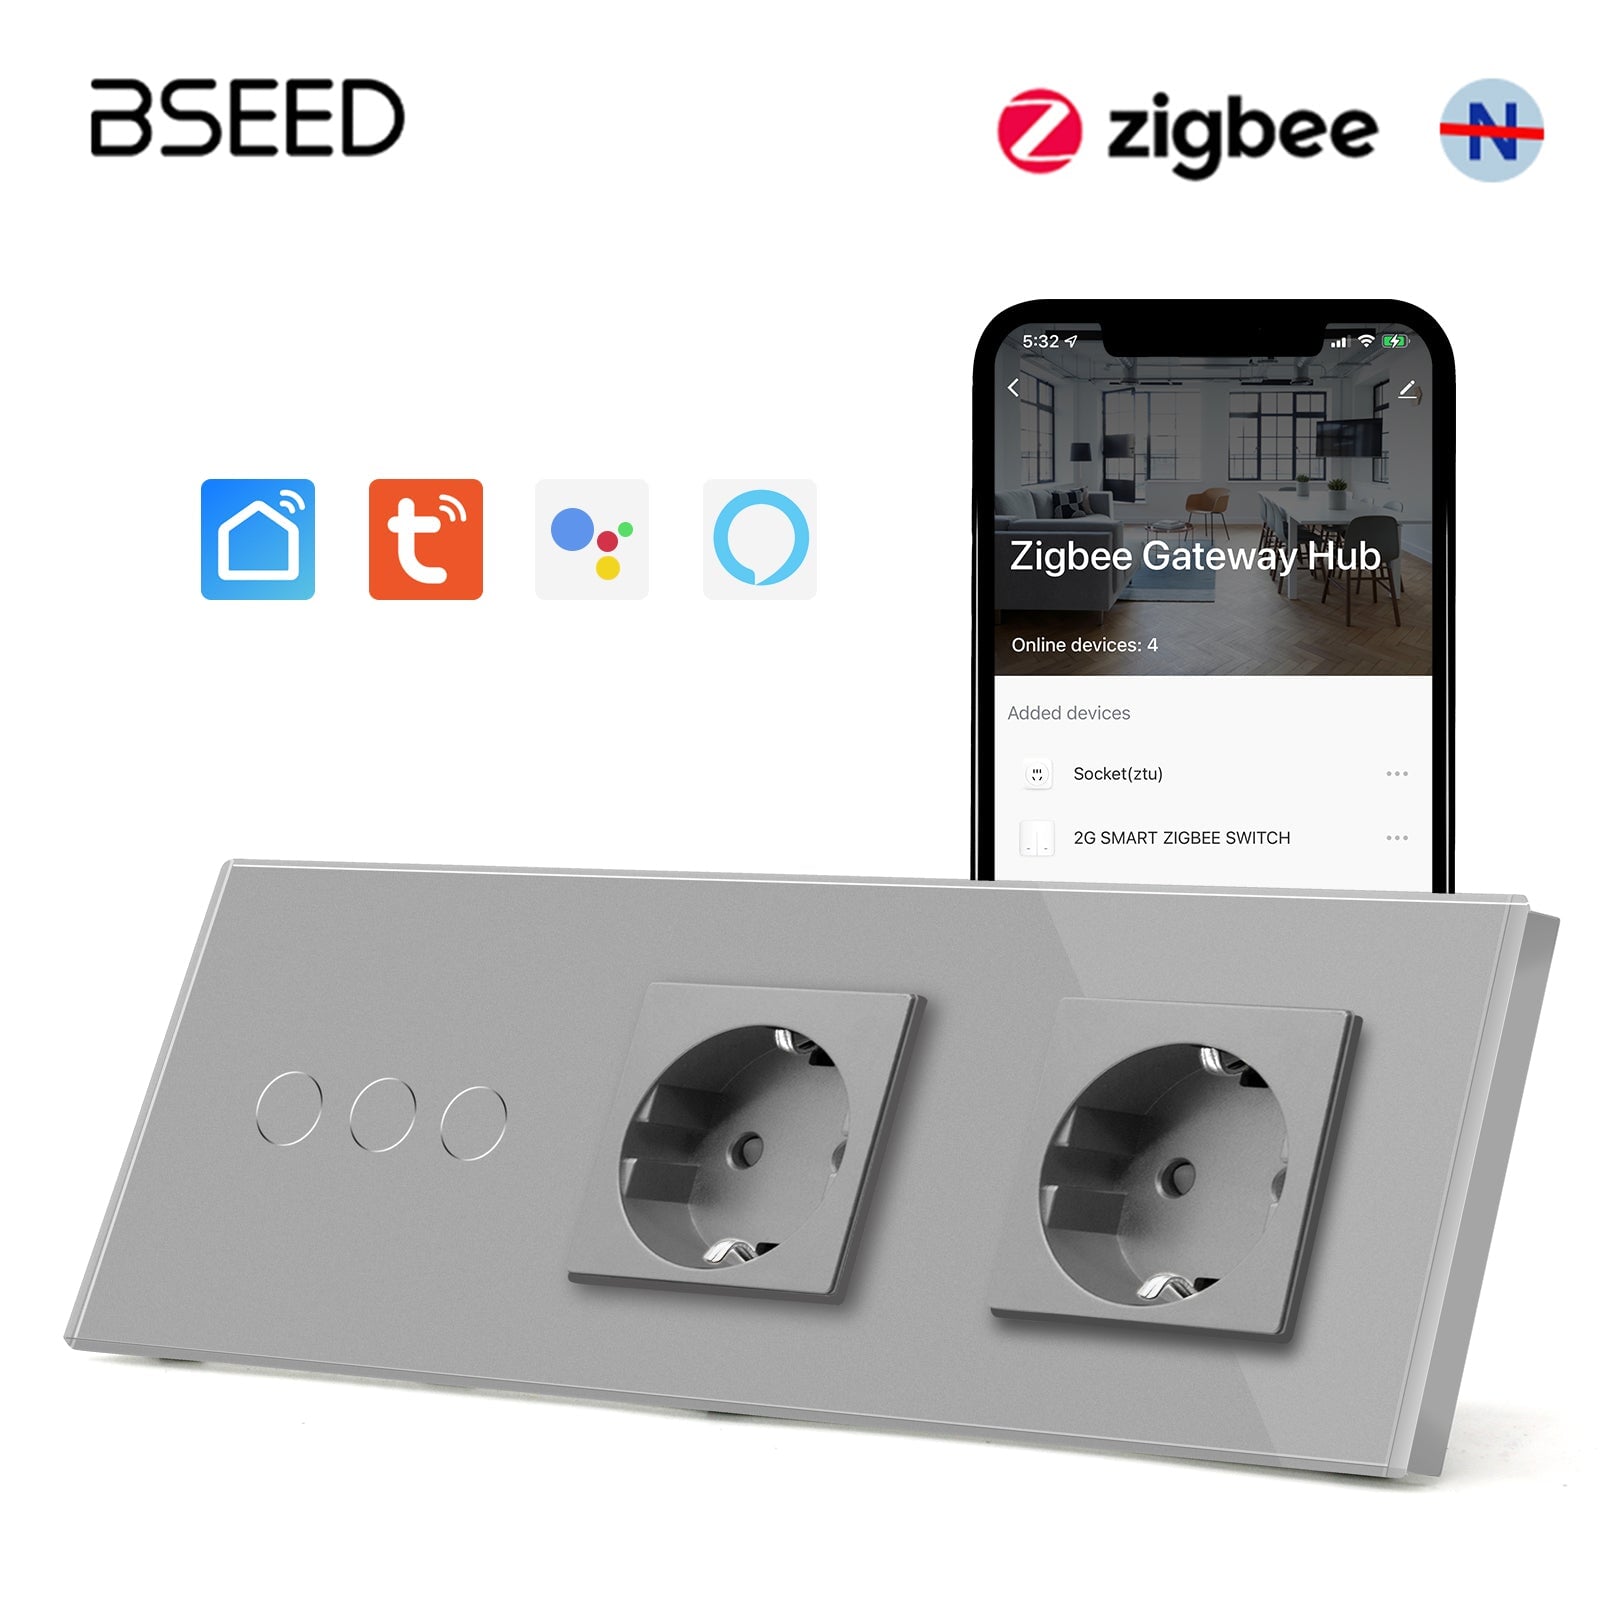 Bseed Zigbee Touch 1/2/3 Gang Light Switches Single Live Line Multi Control With Double EU Standard Not Smart Wall Sockets Light Switches Bseedswitch Grey 3Gang 